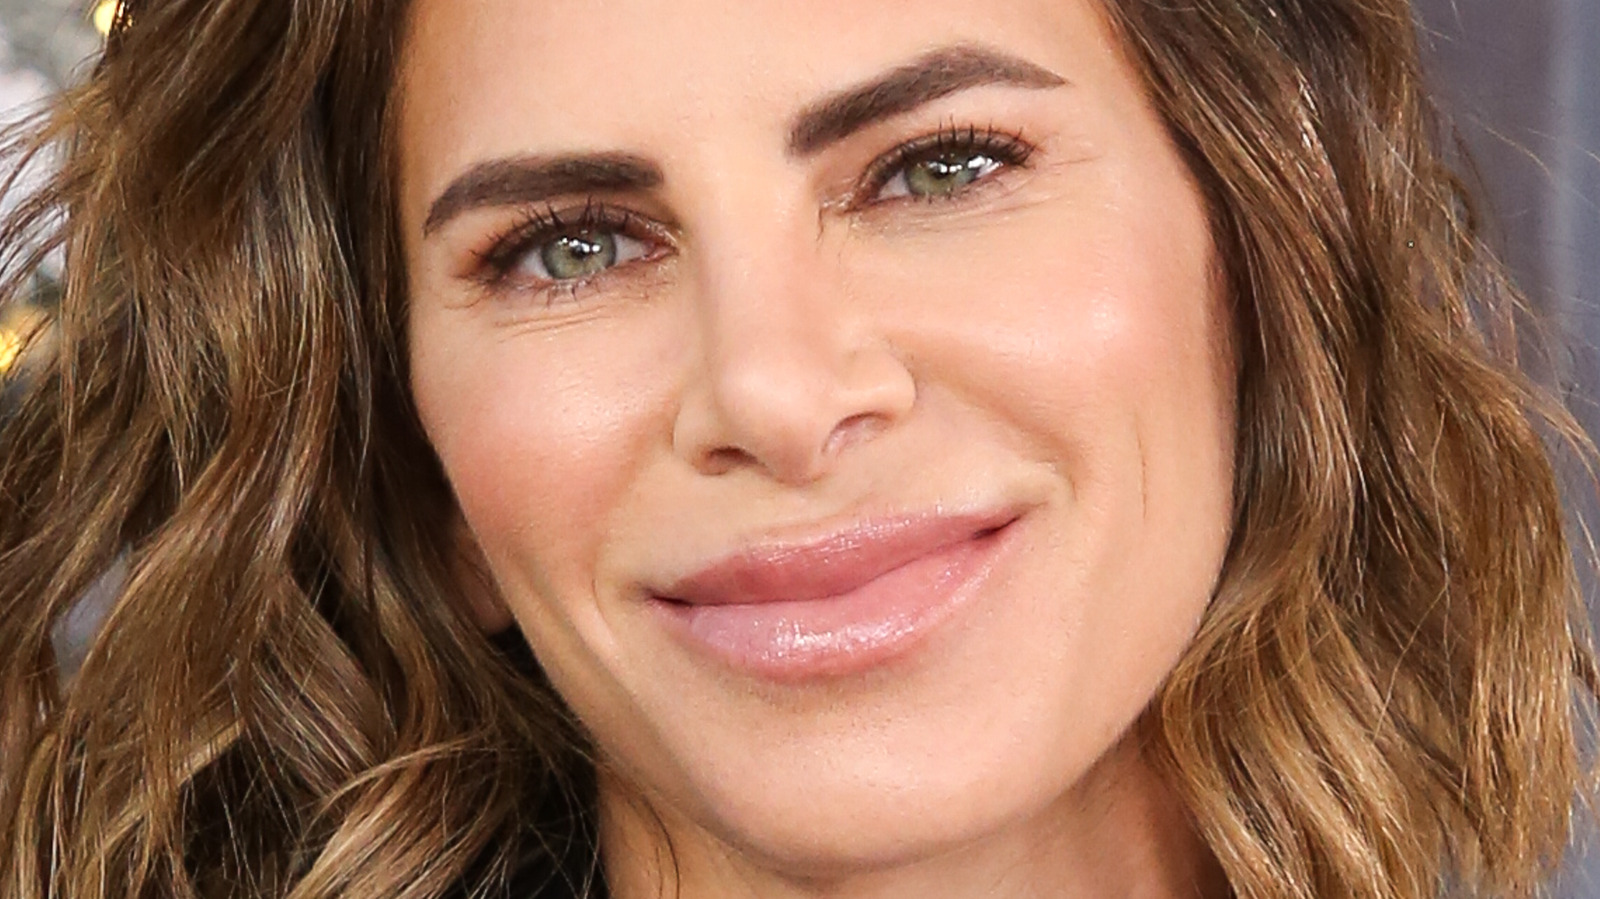 What we know about Jillian Michaels’ Engagement